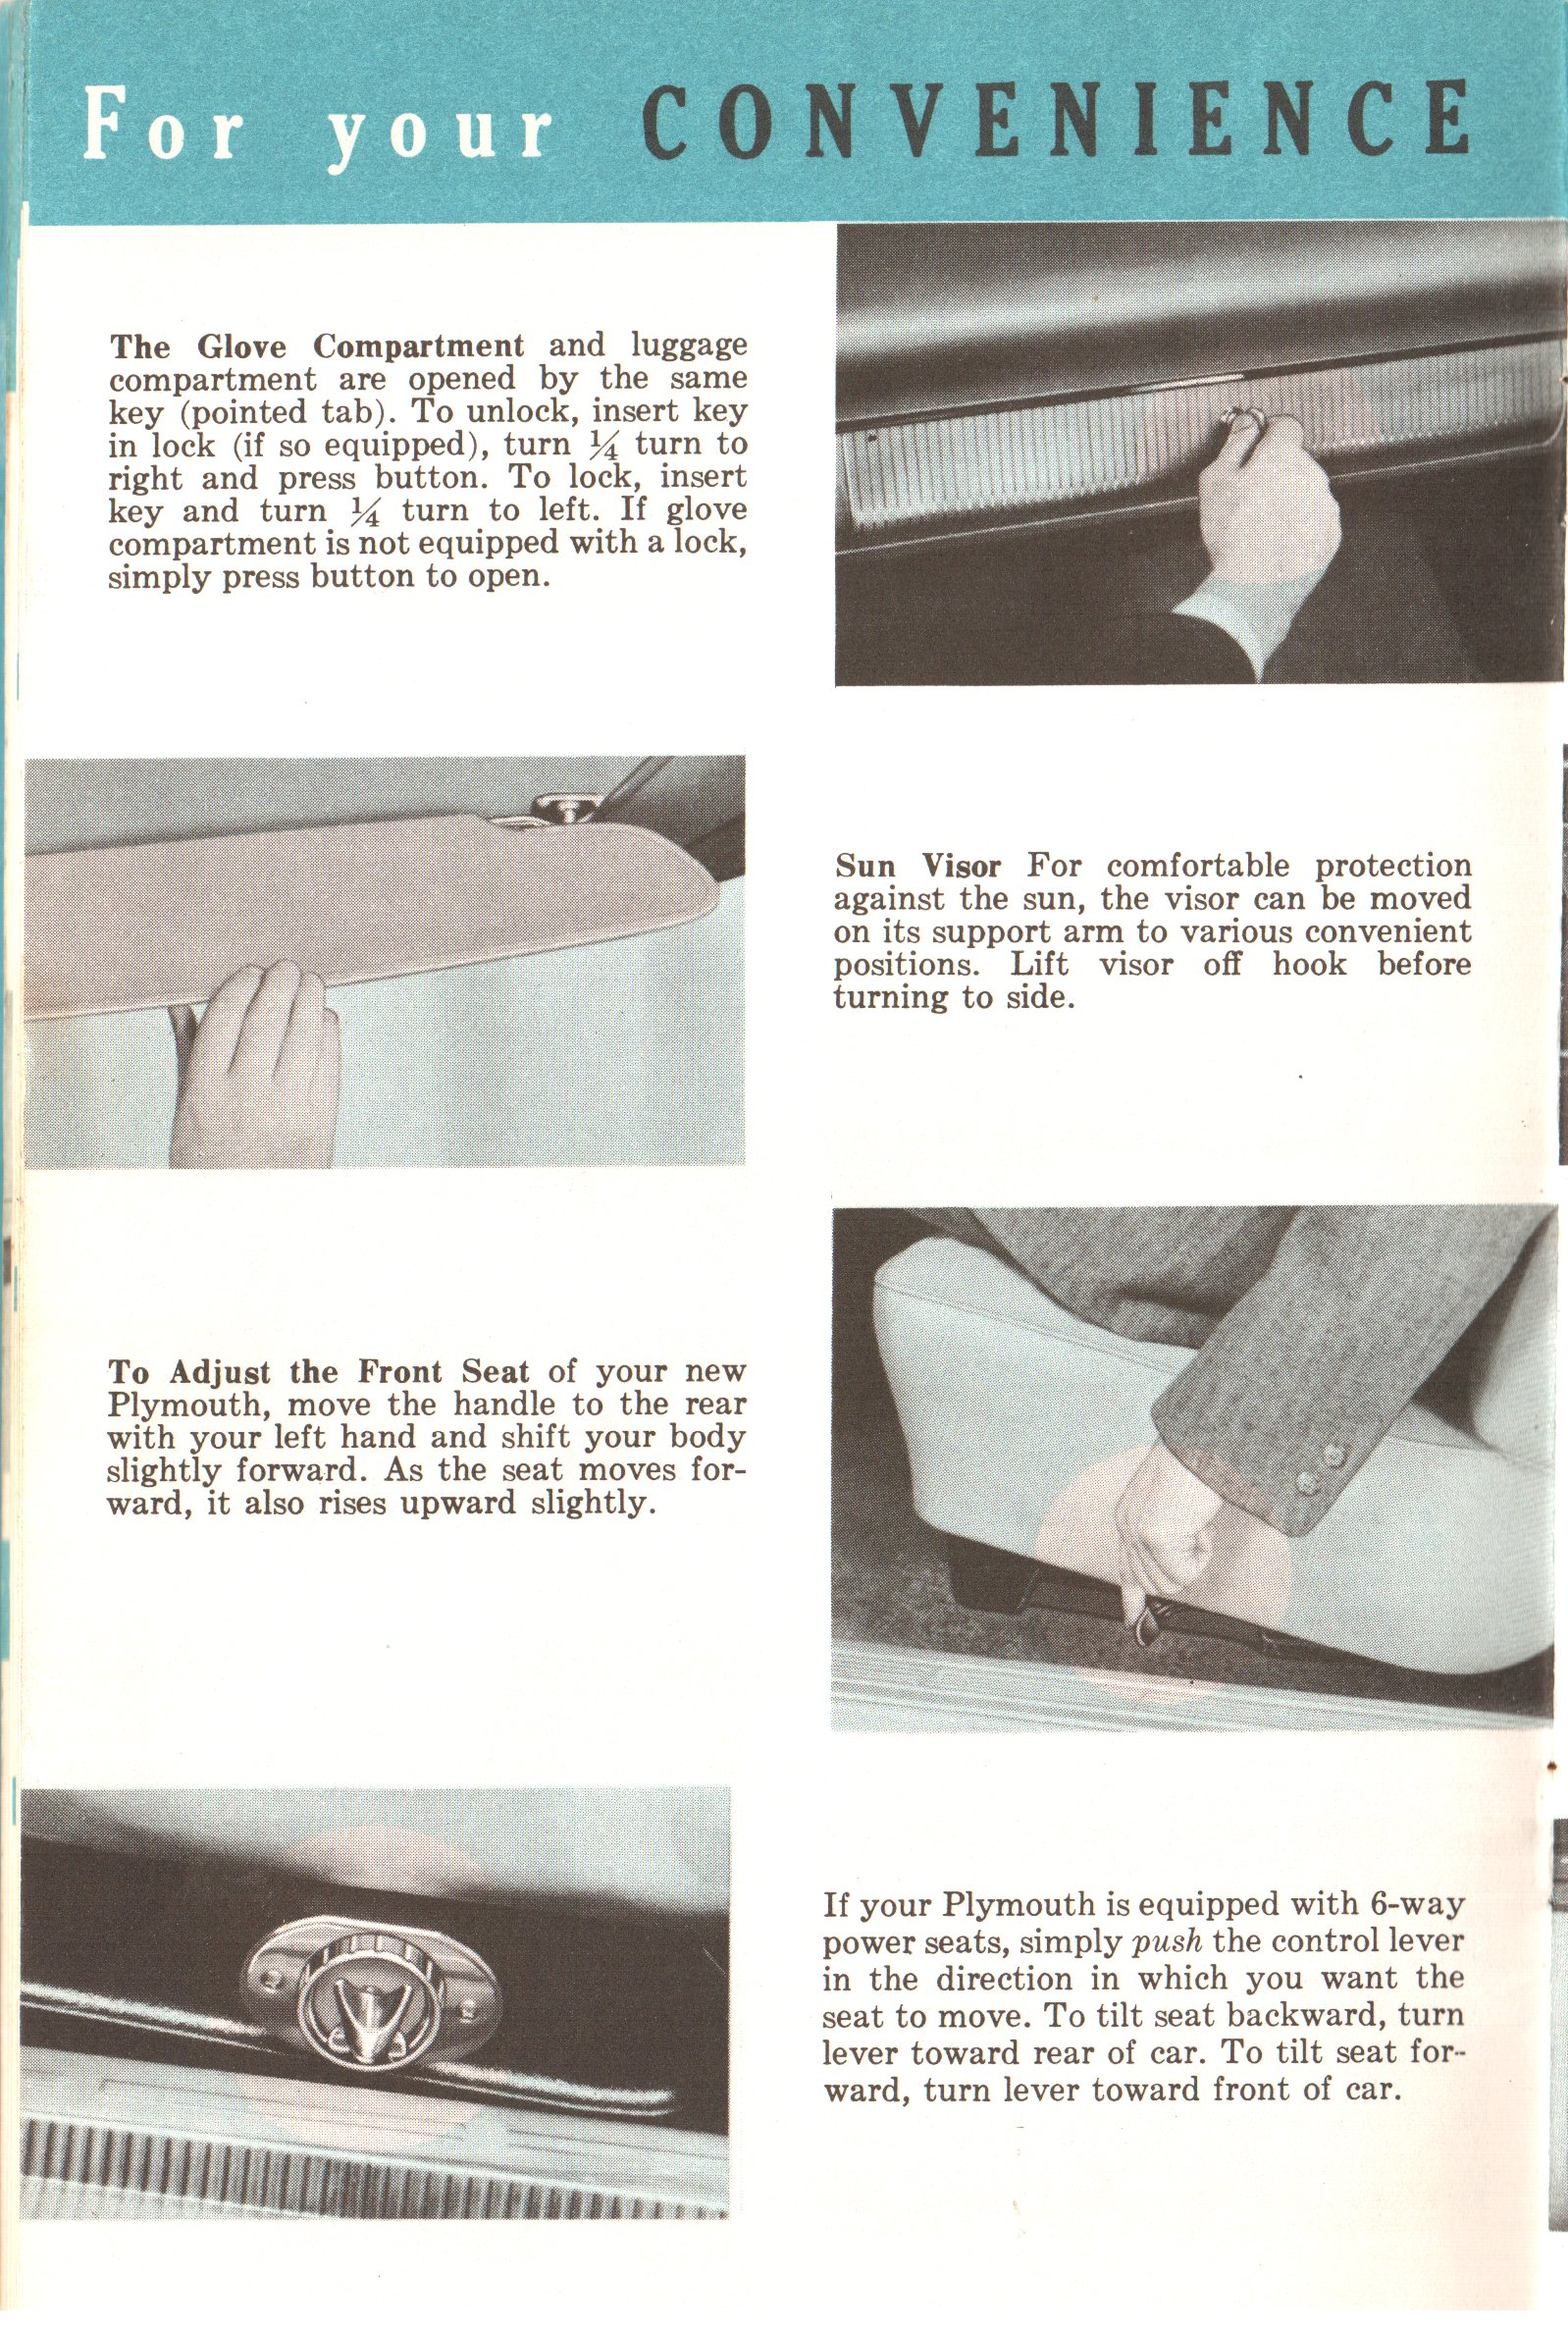 1960_Plymouth_Owners_Manual-12